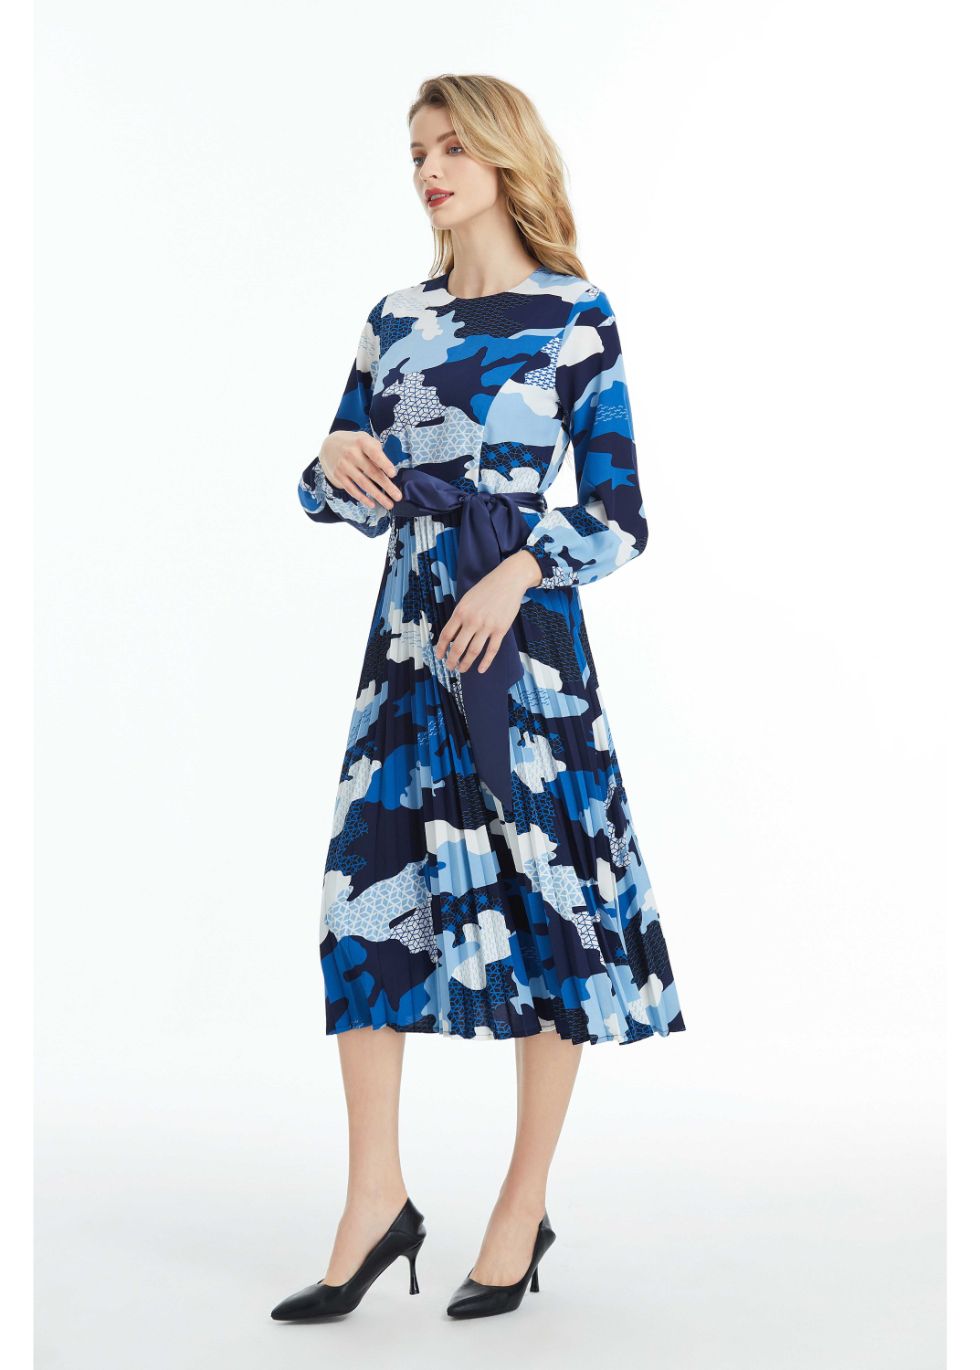 Long Sleeved Belted Colorful Print Midi Dress - seilerlanguageservices